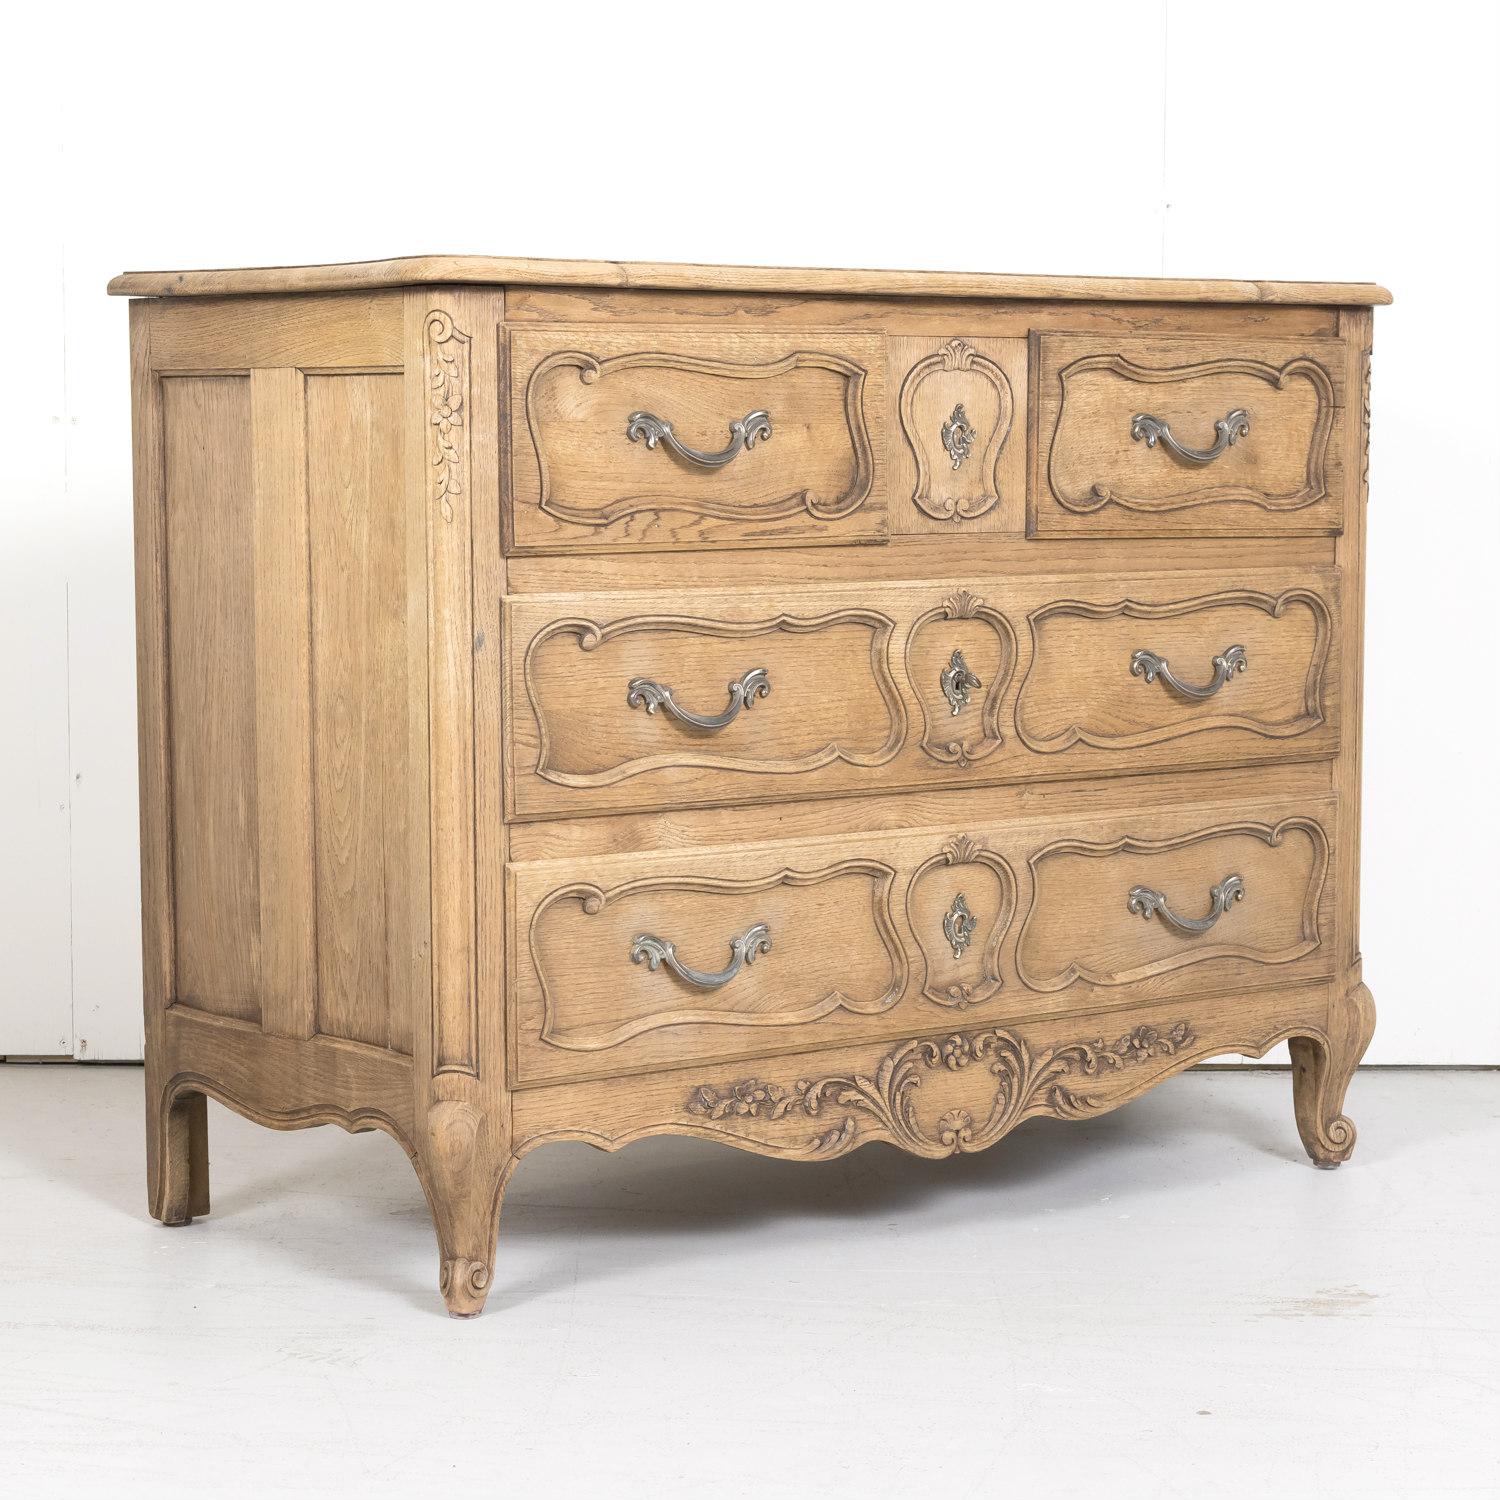 Antique French Country Louis XV style four-drawer commode handcrafted in Normandy of old growth oak that's been bleached or washed to a natural finish retaining its beautiful patina, circa 1900s, having a beautifully carved serpentine top above two